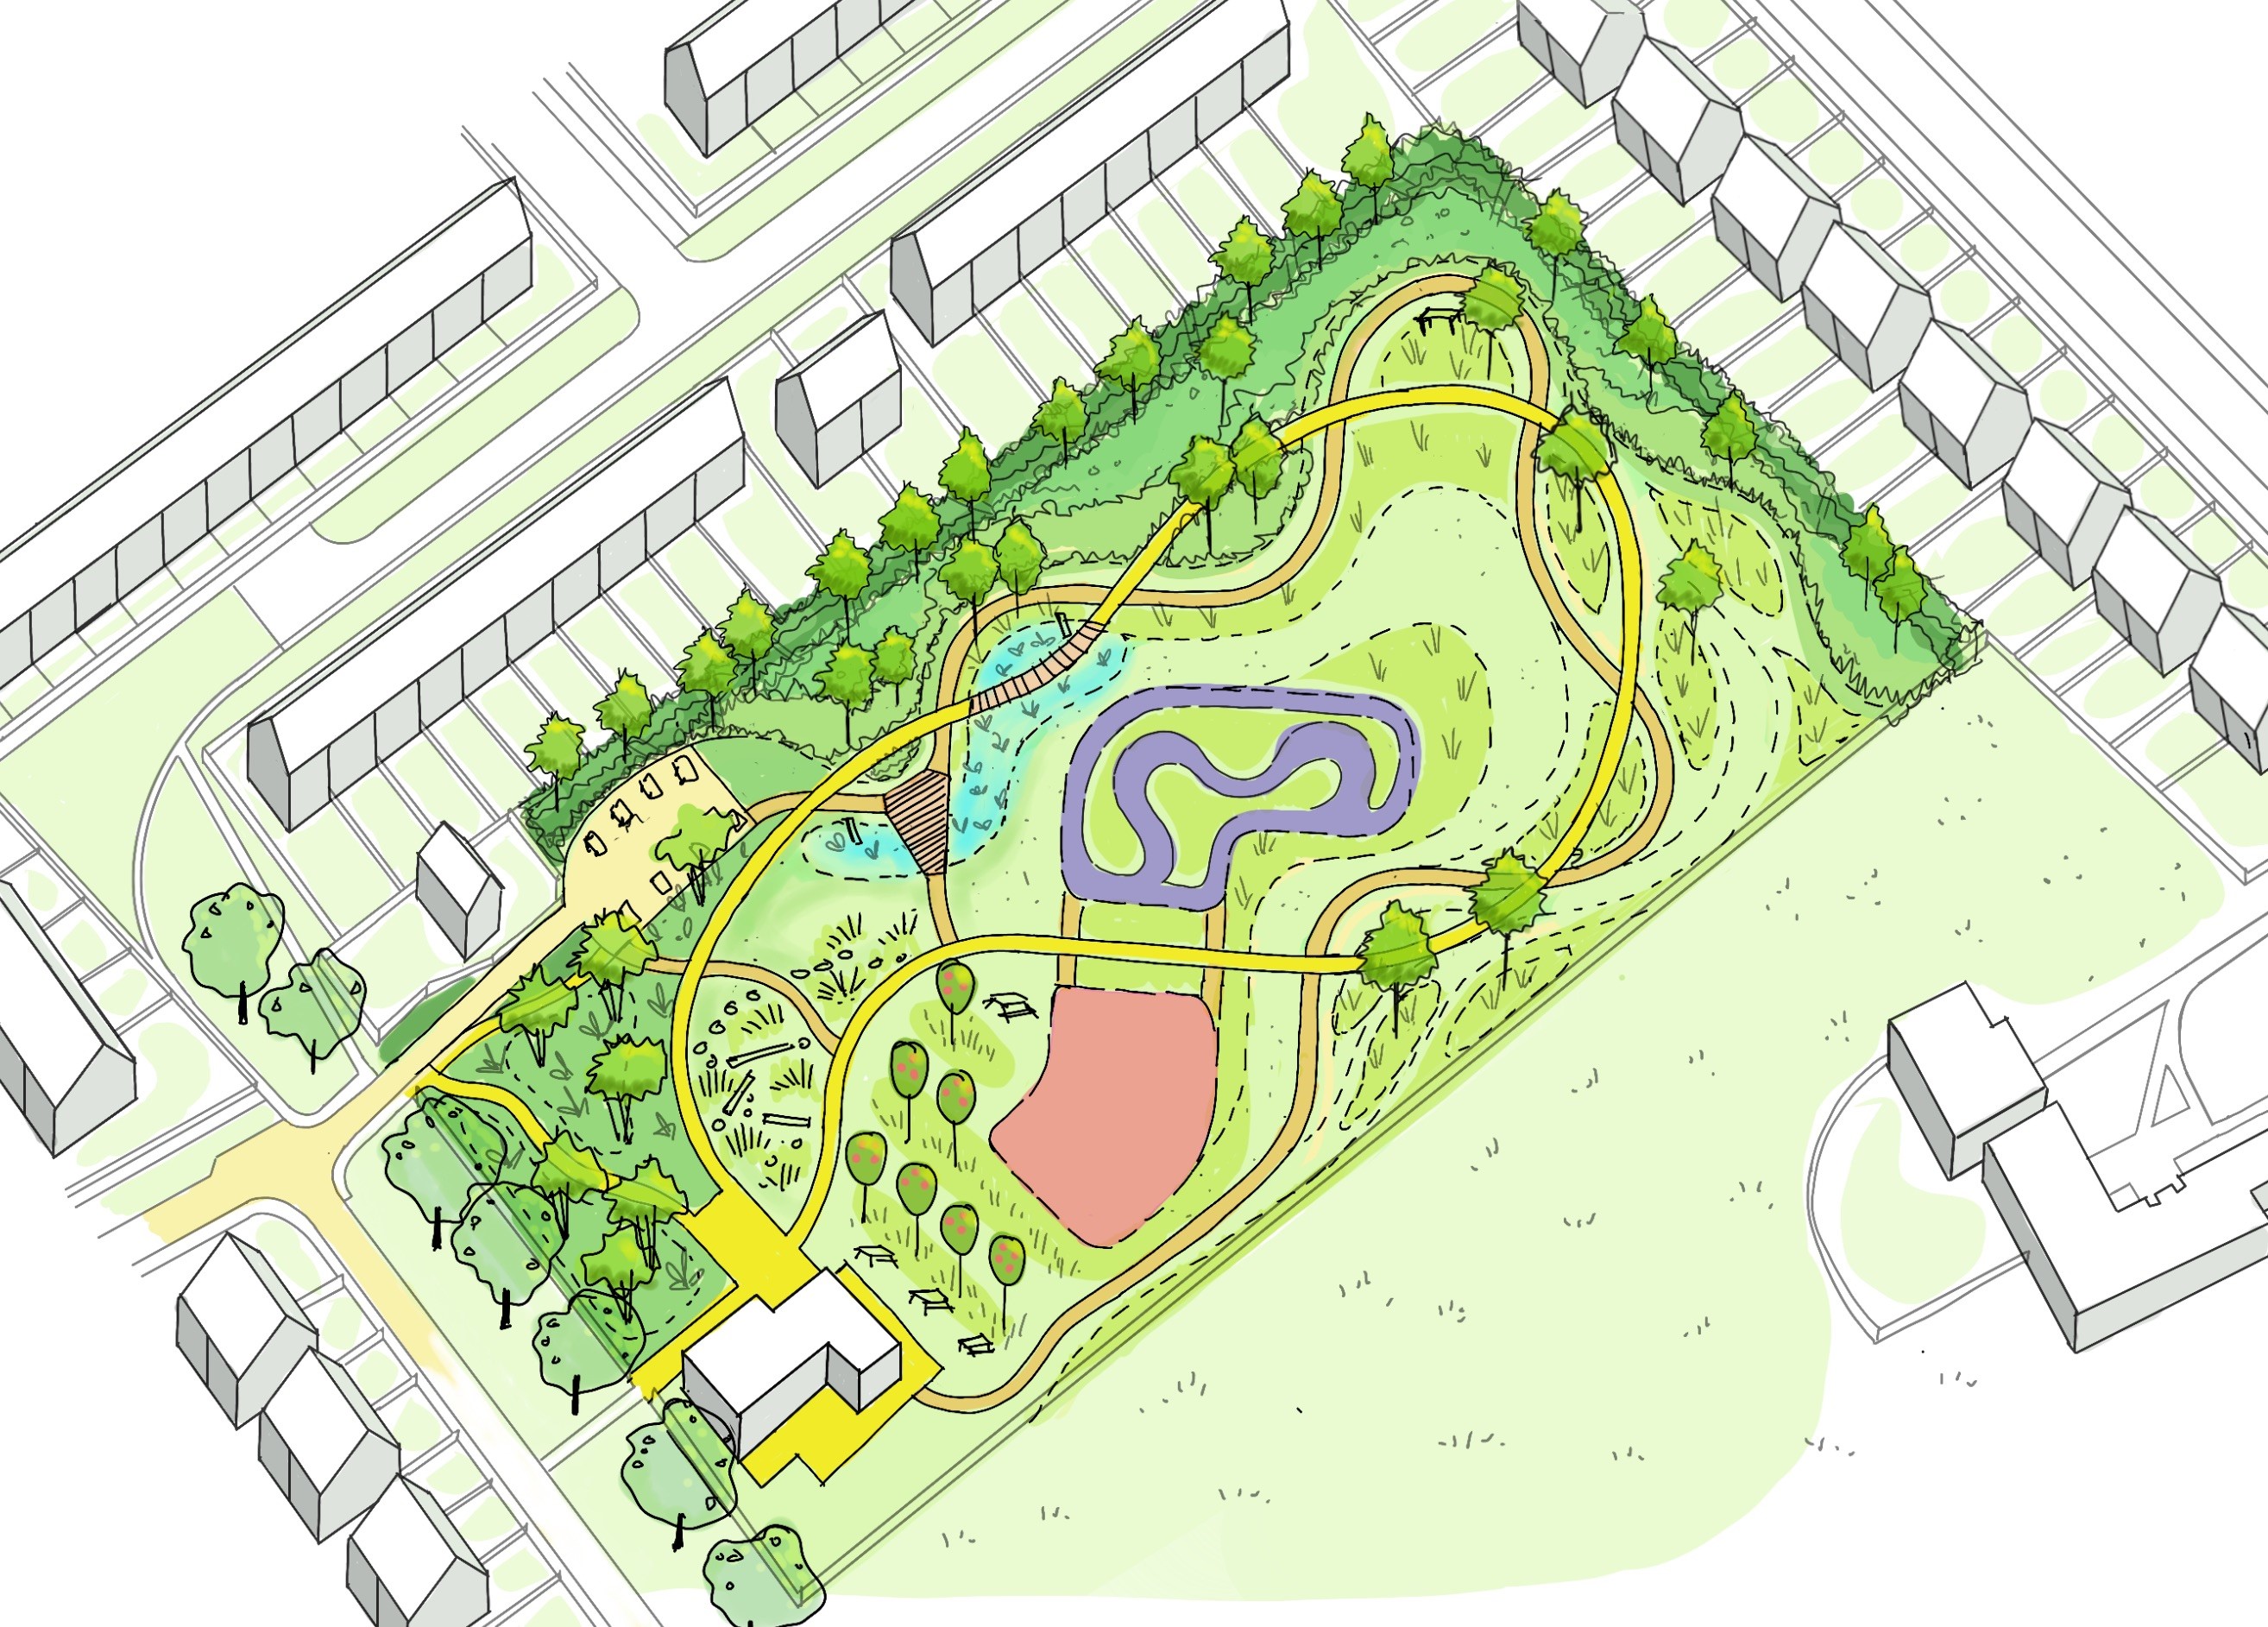 An artist's impression of the proposed Eastfield Park in Scarborough.